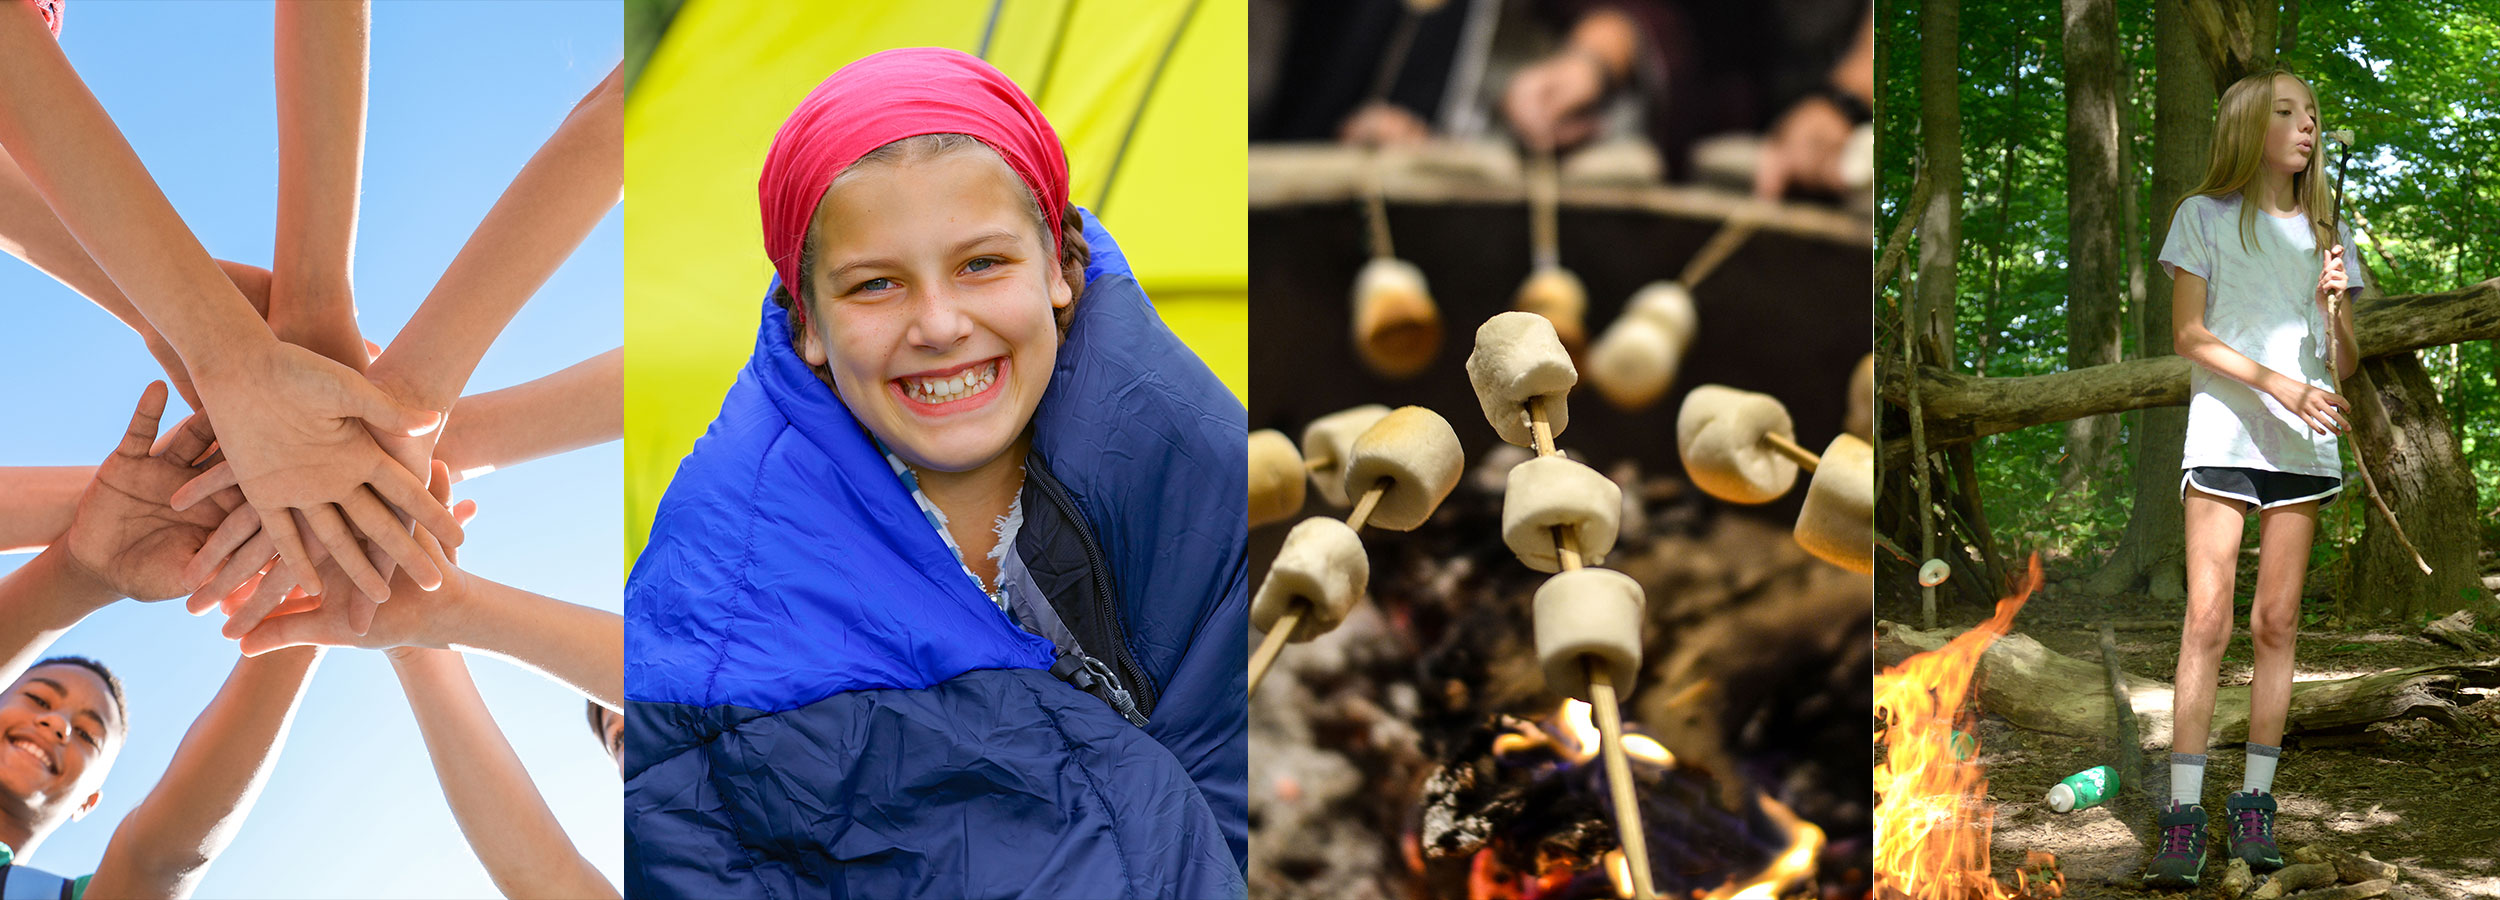 Montage of images: hands stacked, girl in sleeping bag, smores over an open fire, and girl holding stick with marshmallow over fire.